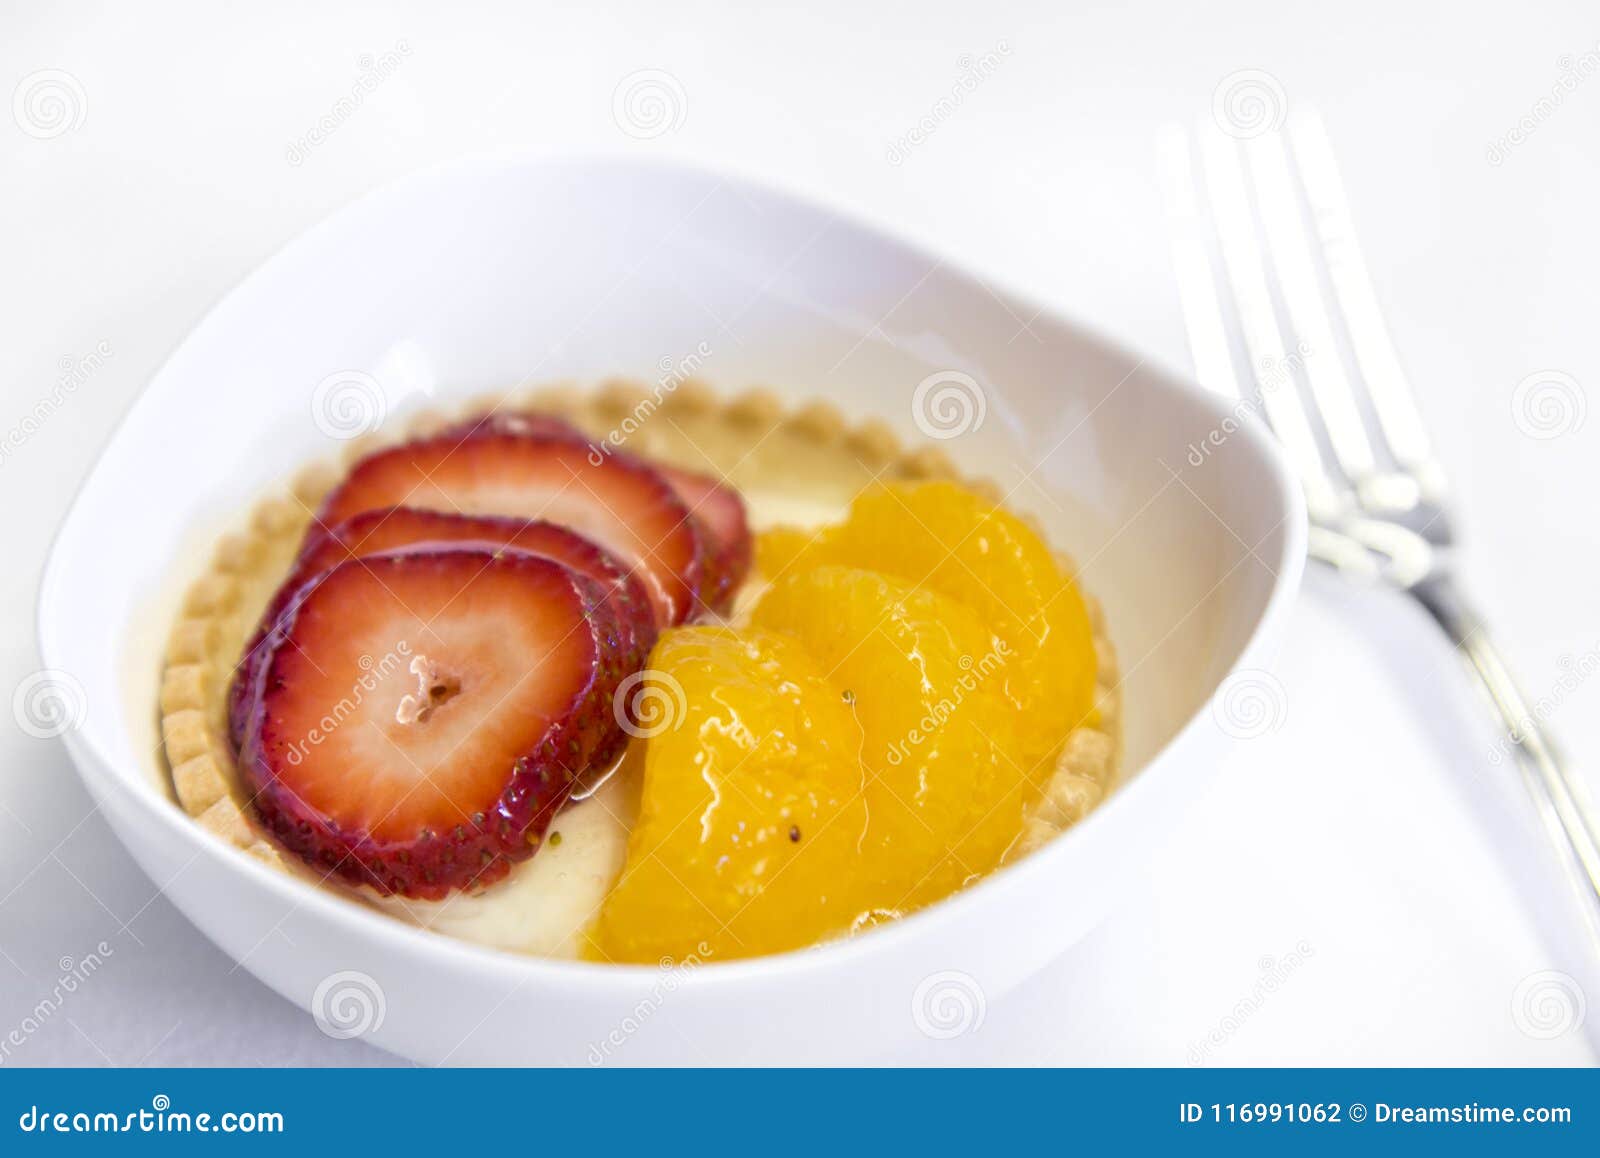 set inflight meal fruit on a tray, on a white table